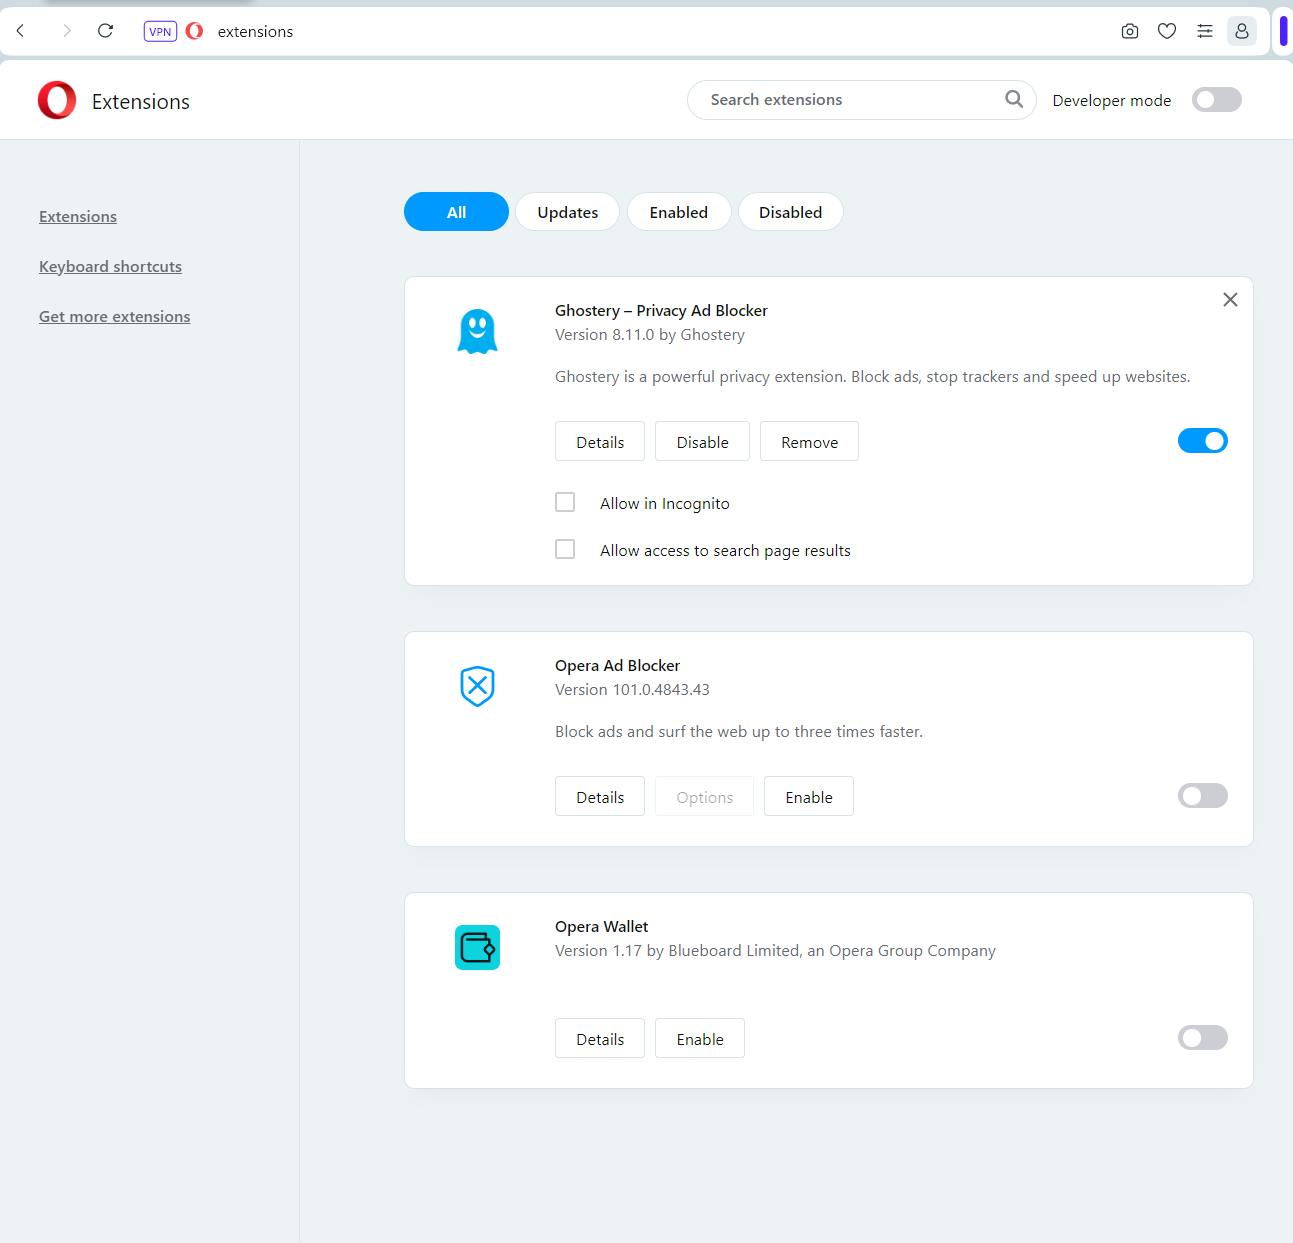 Shows the extensions page in Opera.